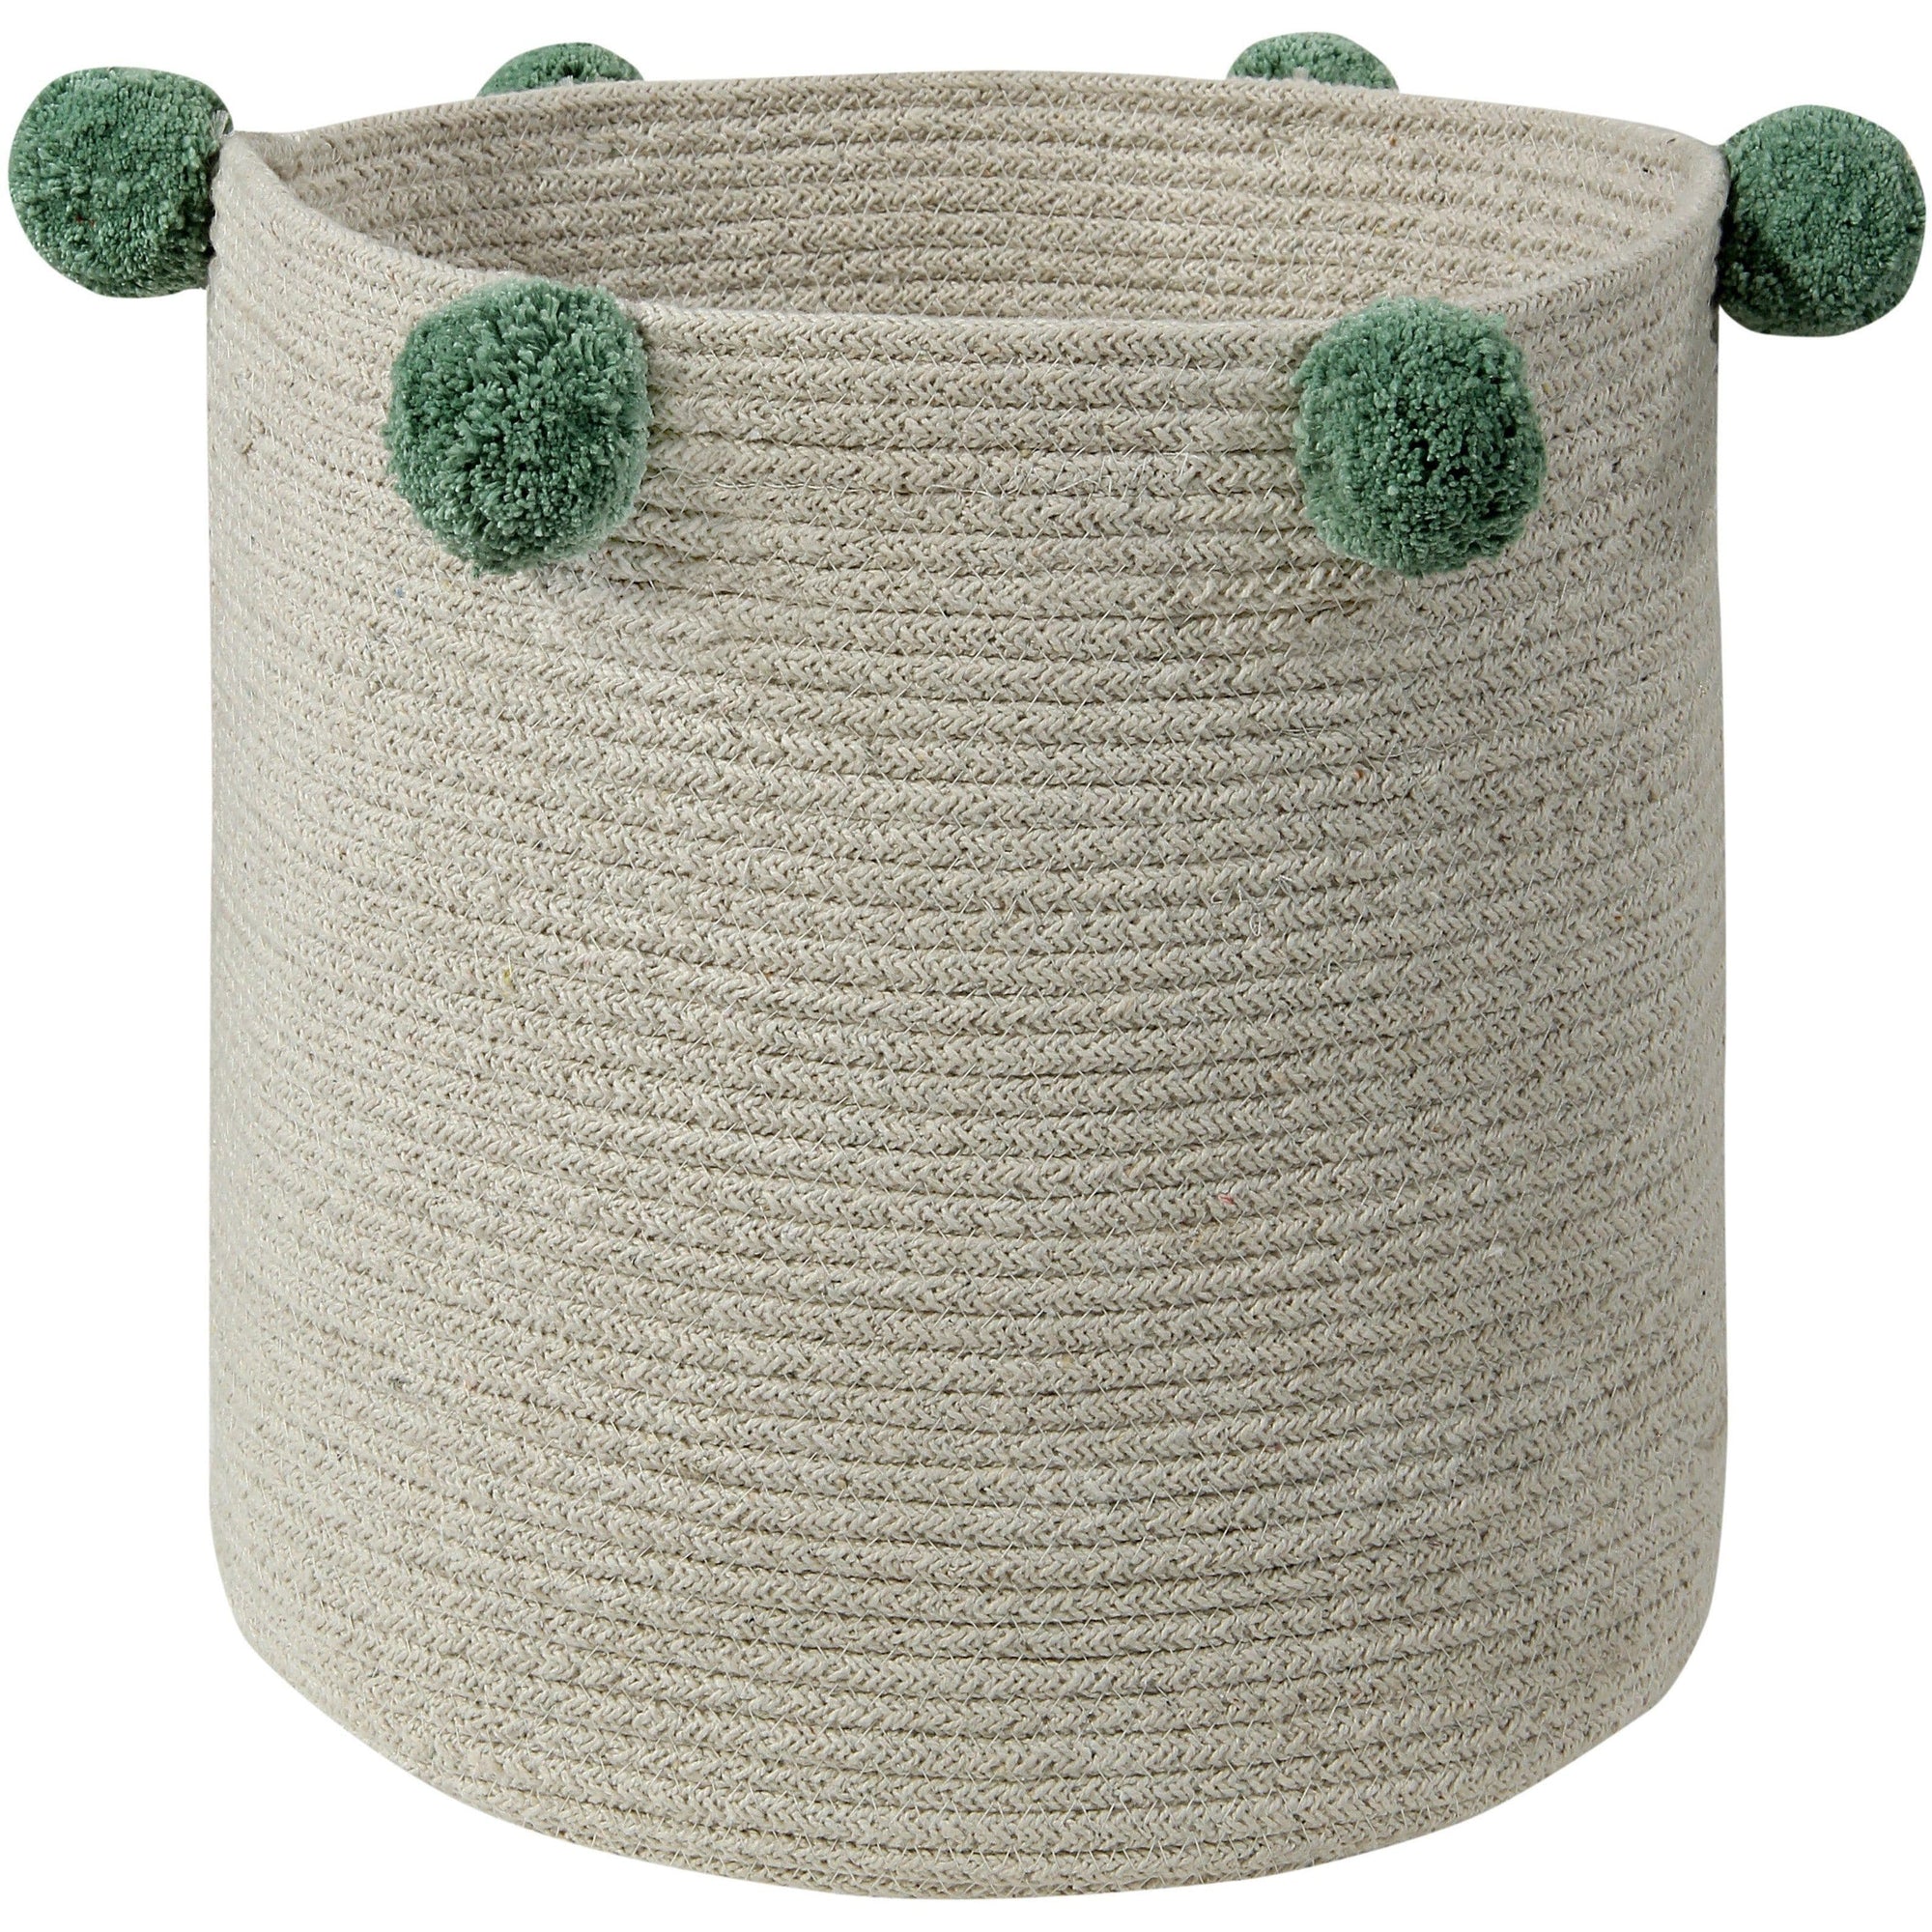 Rugs by Roo | Lorena Canals Bubbly Natural Green Basket-BSK-NAT-GREEN